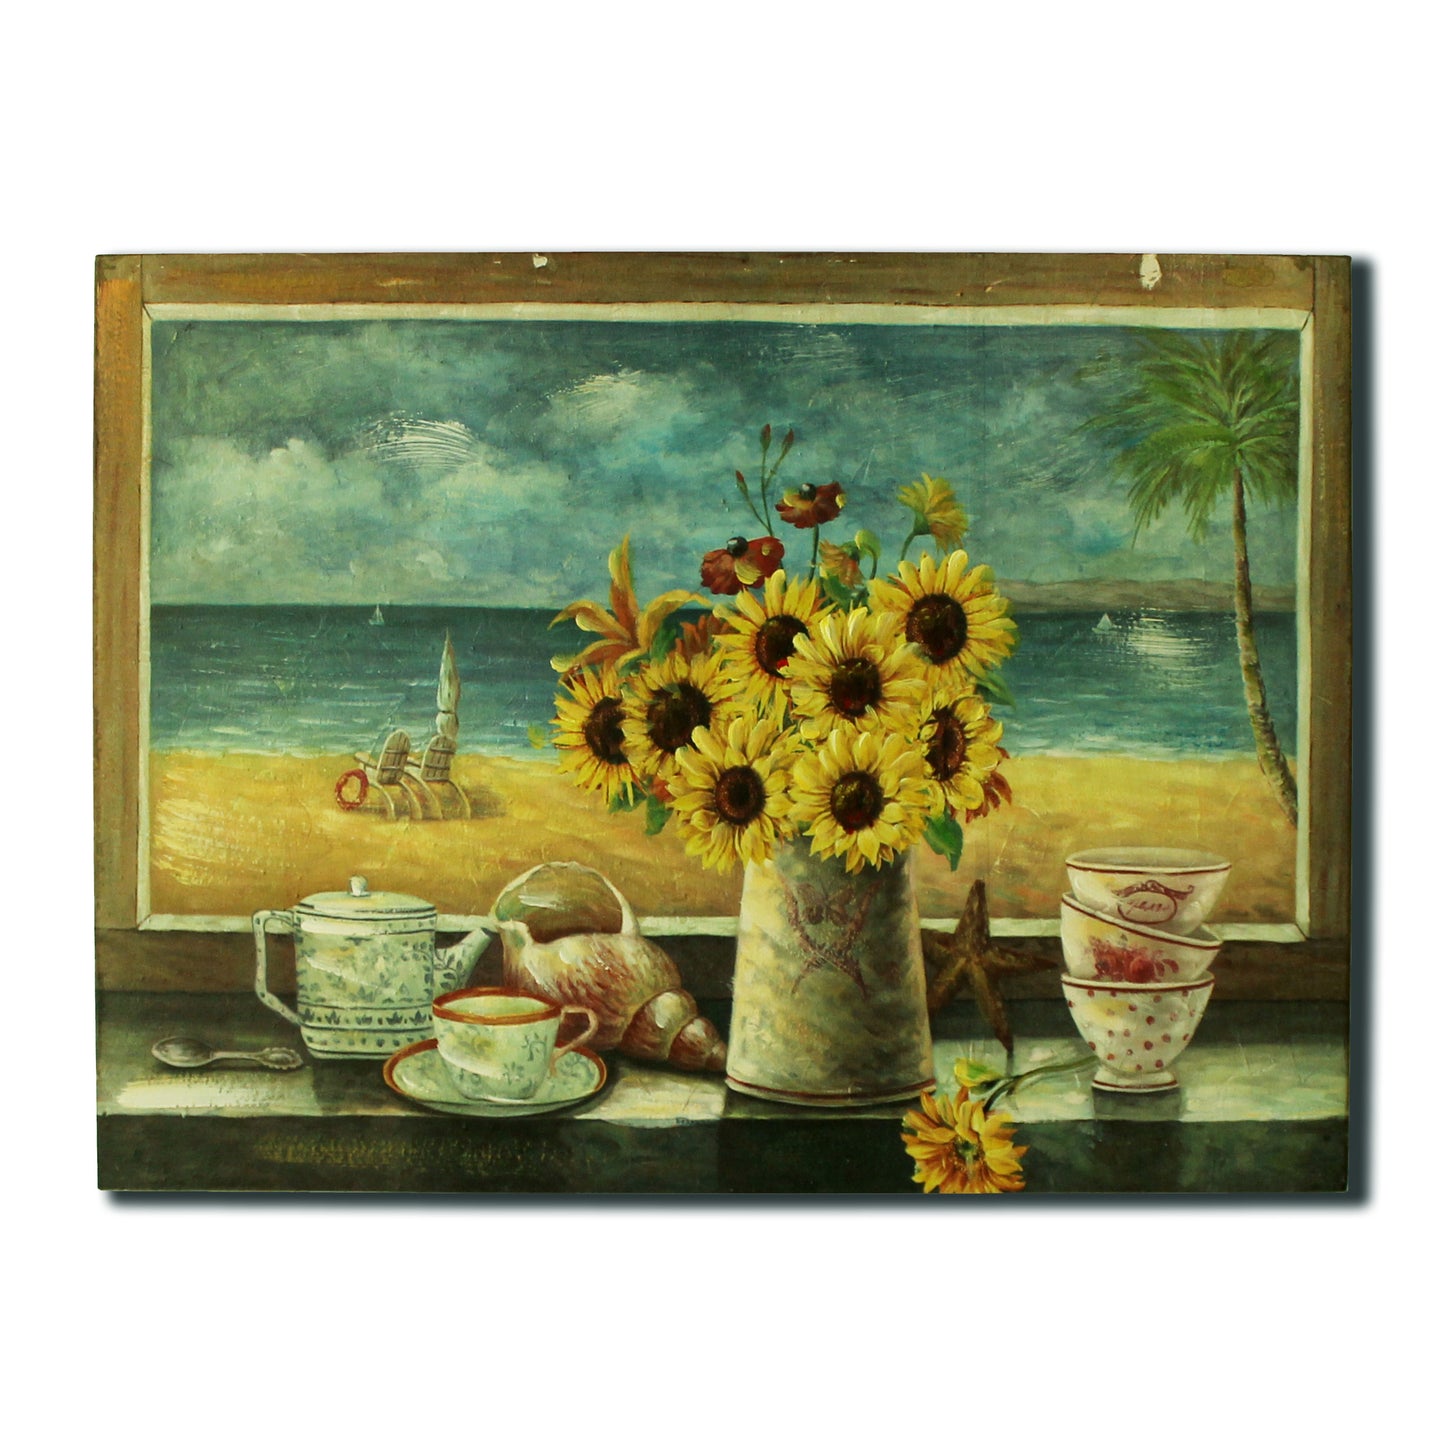 CVHOMEDECO. Primitives Rustic Hand Painted Wooden Frame Wall Hanging 3D Painting Decoration Art, Sunflower in Jar Design, 15.75 x 11.75 Inch